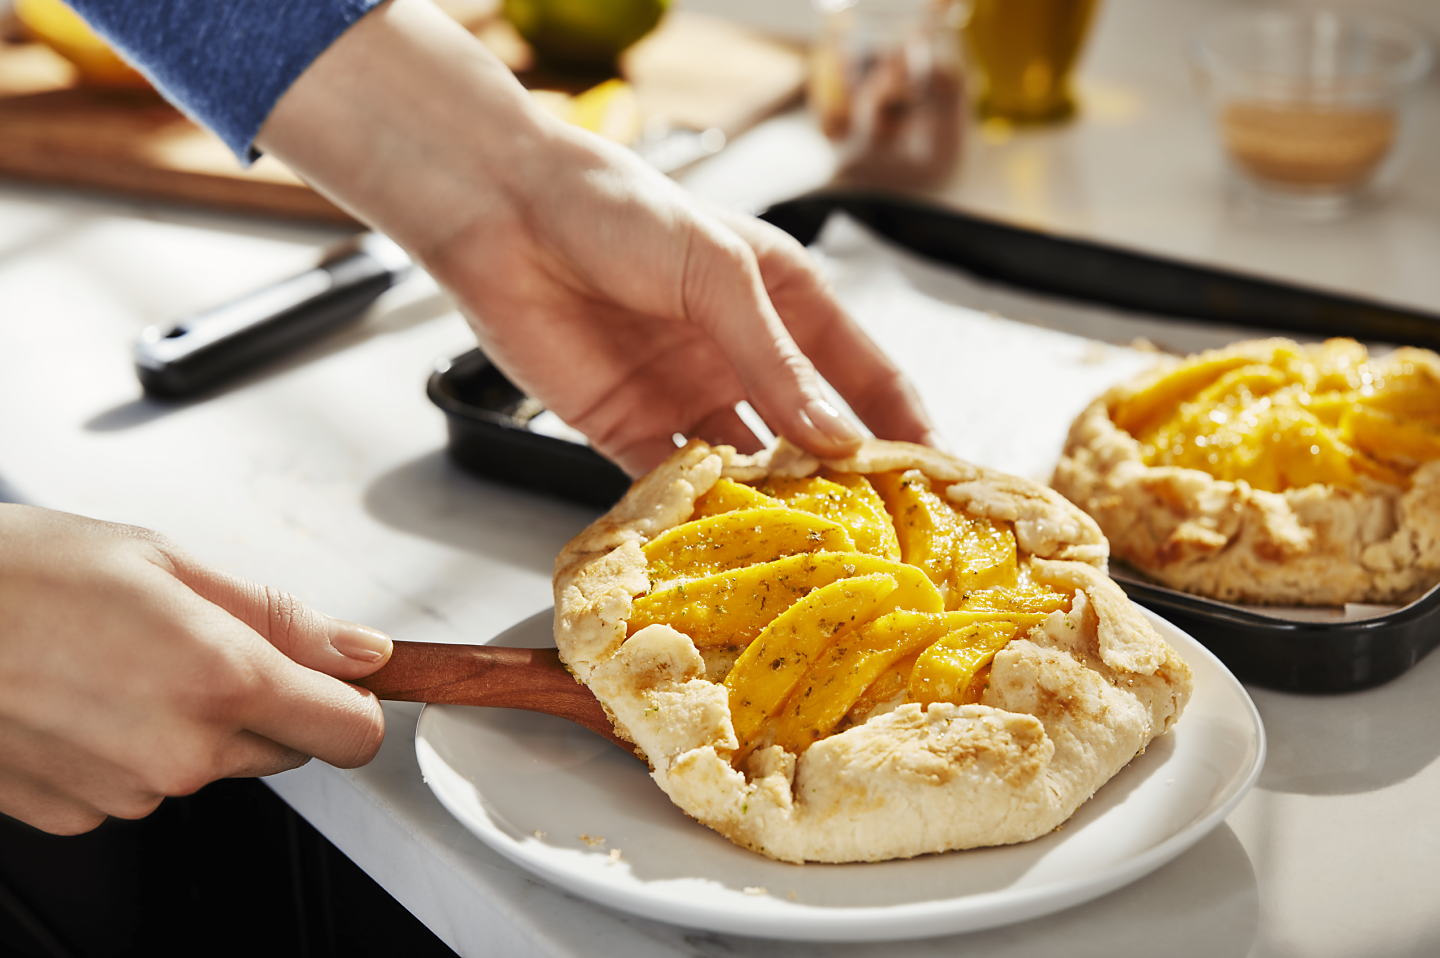 Hands placing homemade apple galette on a plate